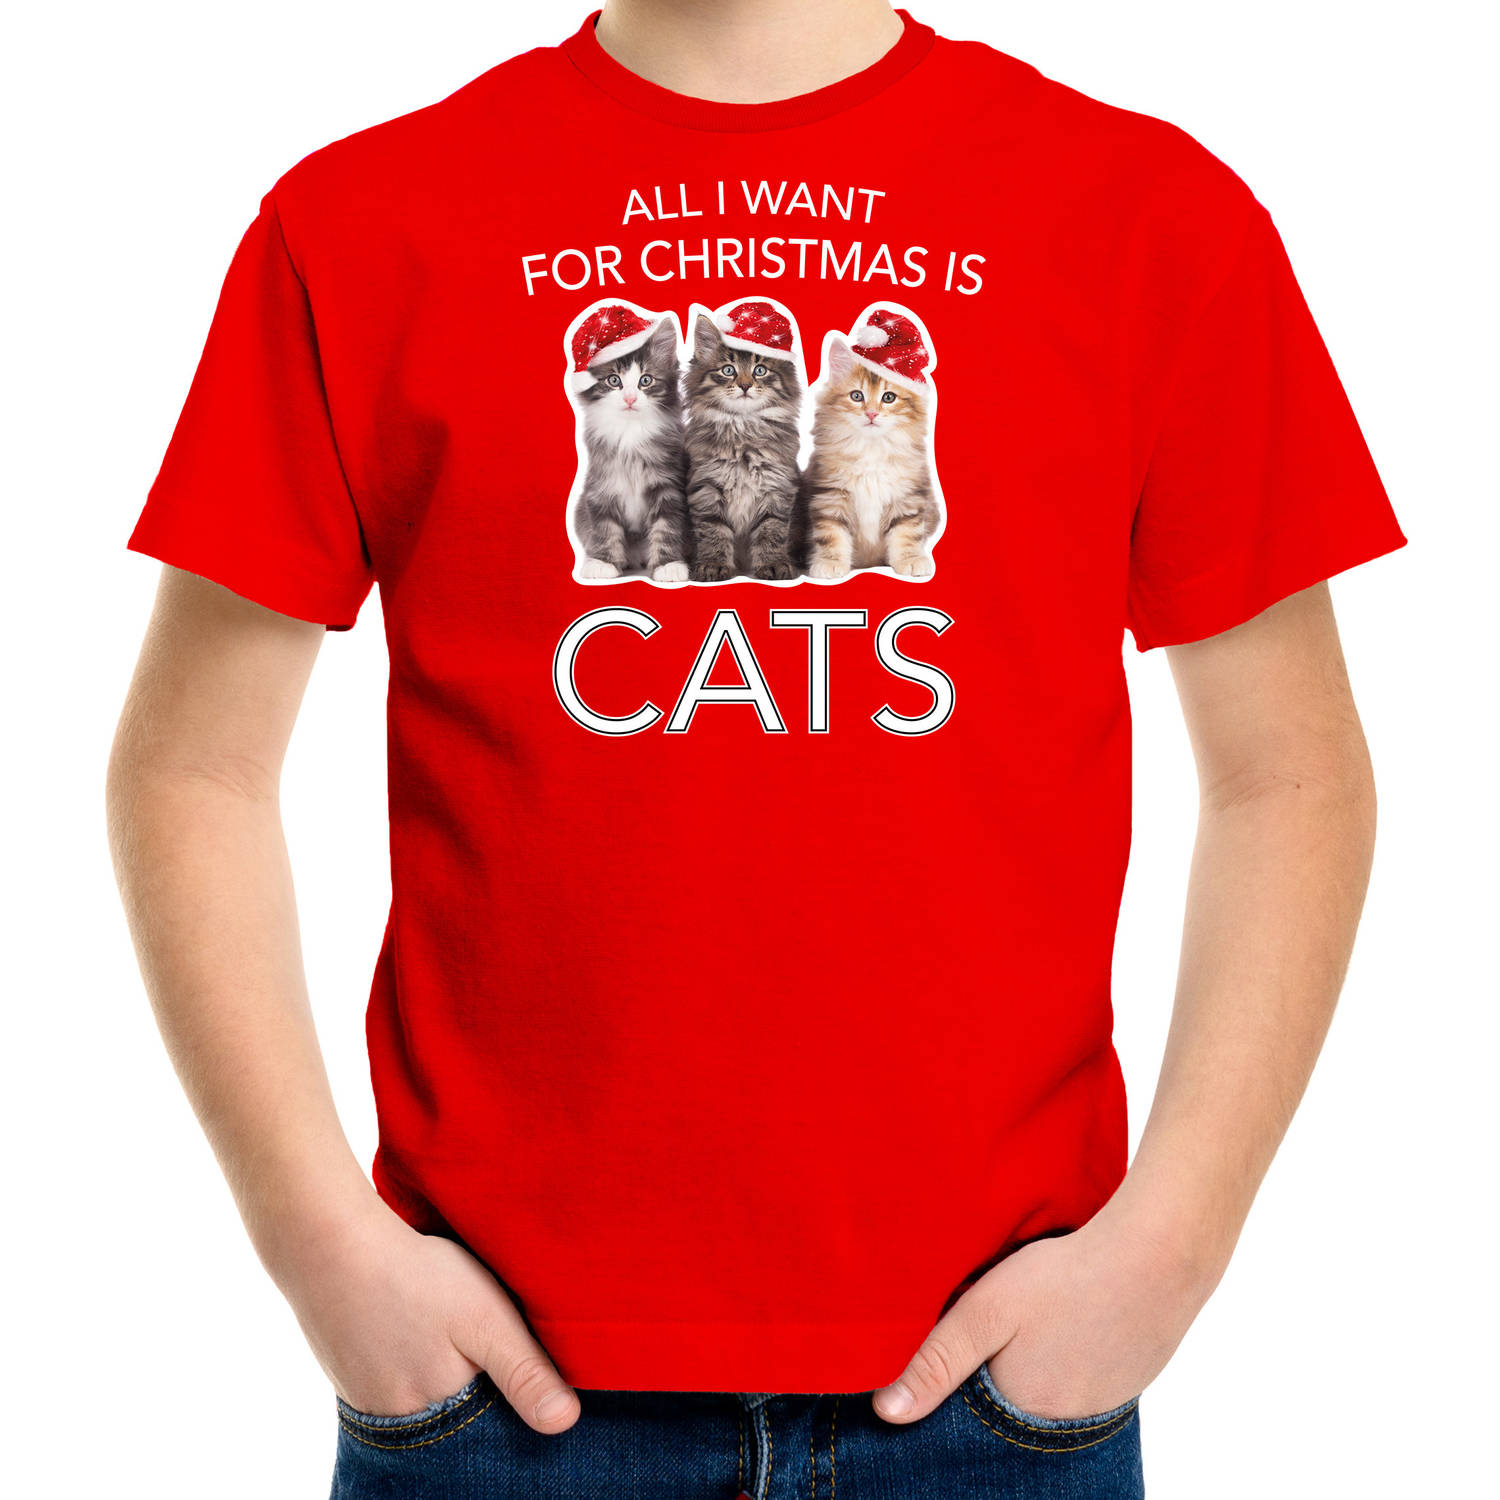 Rood Kerst shirt/ Kerstkleding All i want for Christmas is cats voor kinderen L (140-152) - kerst t-shirts kind